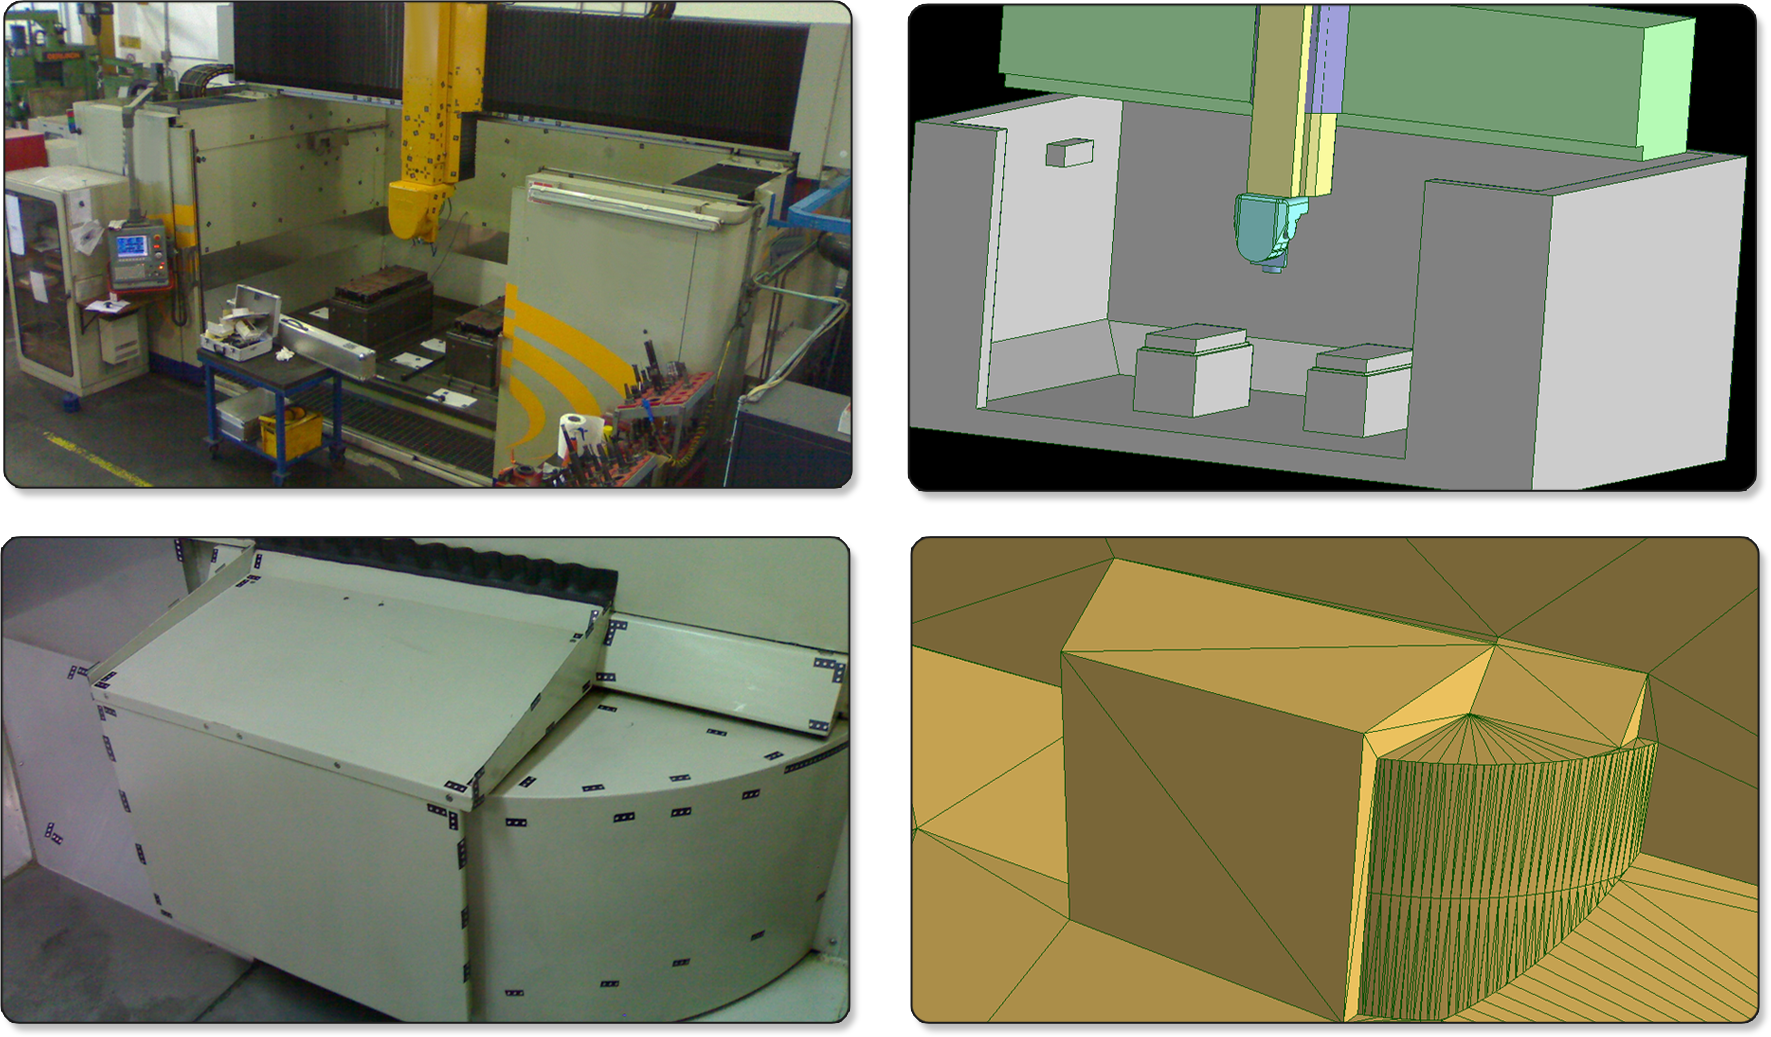 Reconstructions of automation and design environments